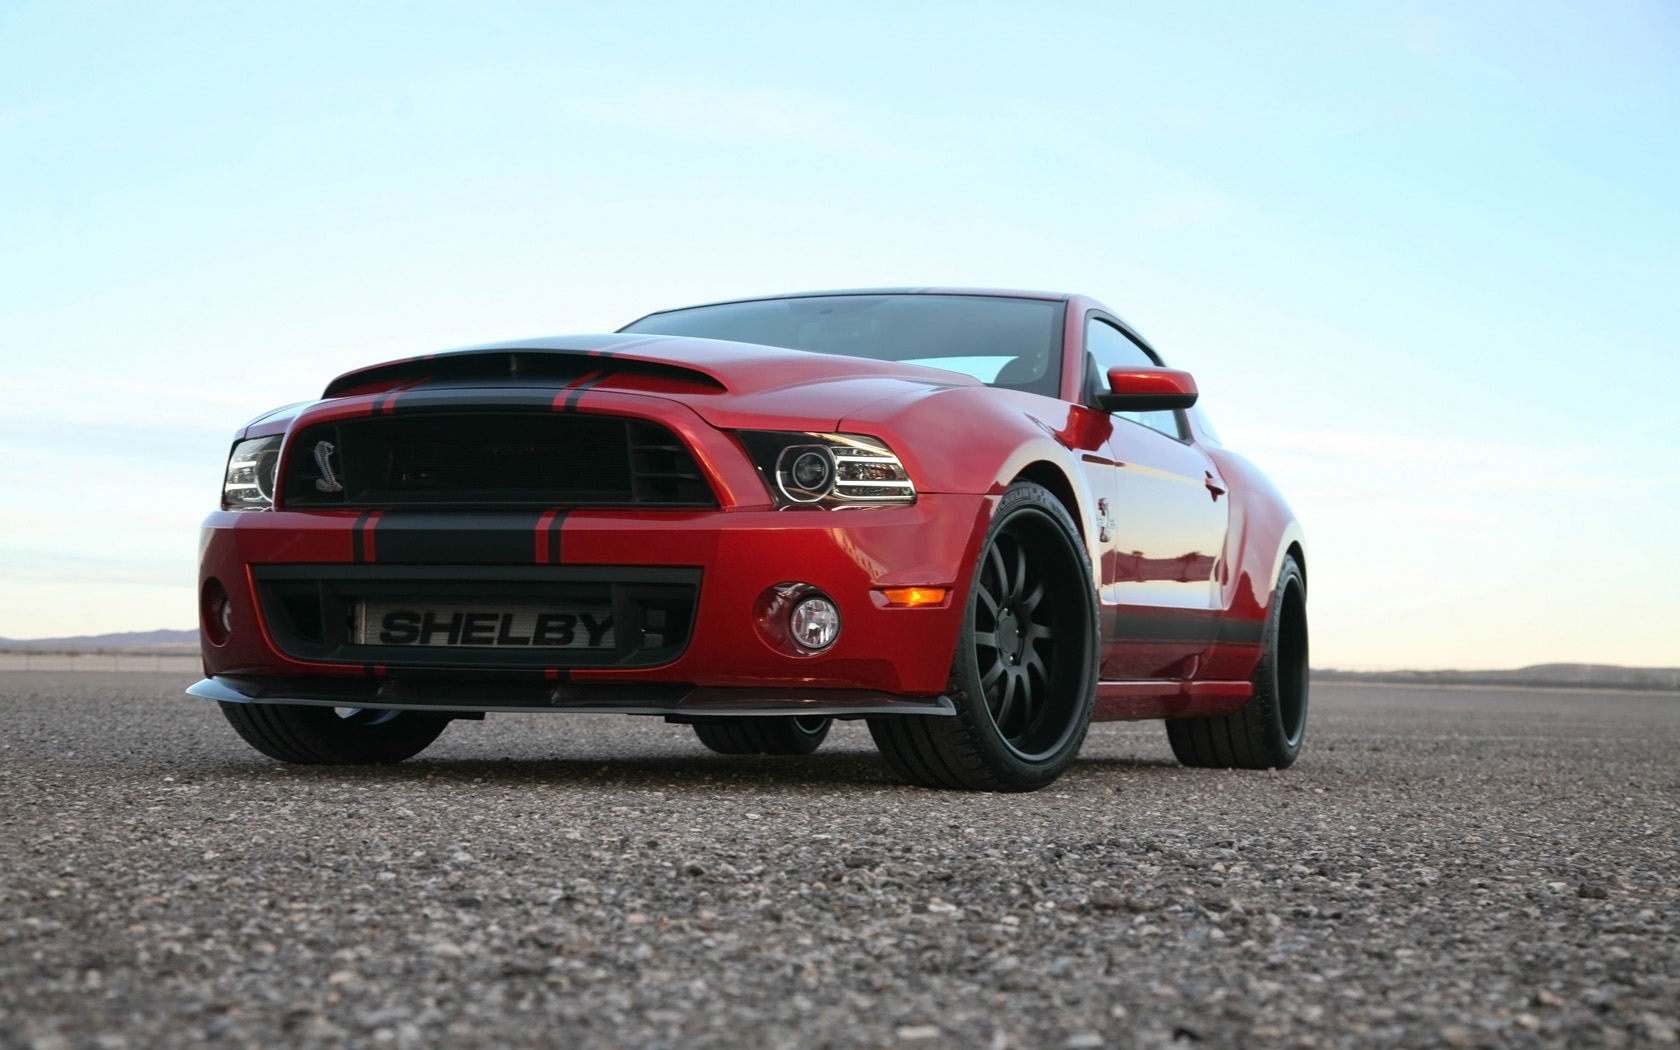 Shelby Gt500 Super Snake Muscle Supercar Ford Mustang H Wallpaper